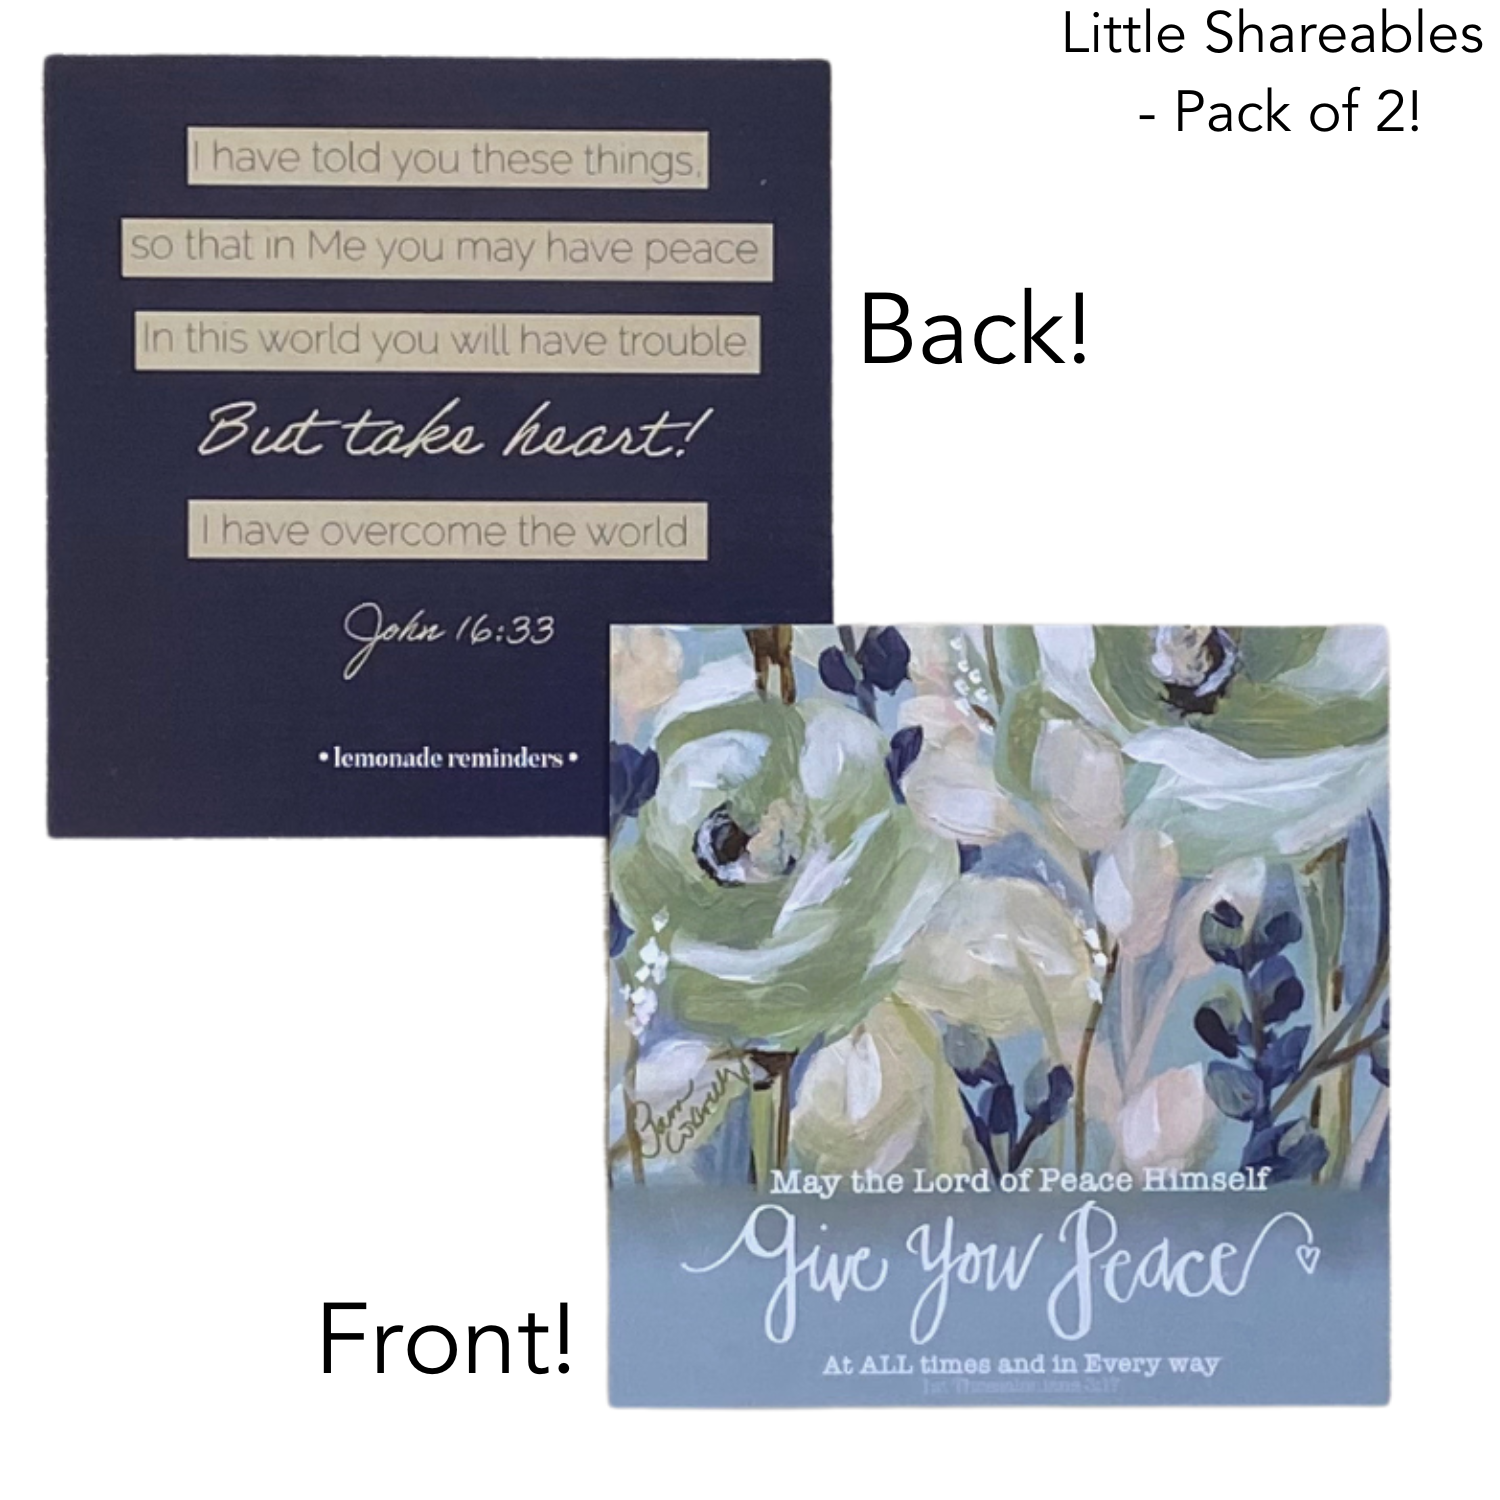 "Give you Peace" 2 Thessalonians 3:16  ~  Little & Mini Shareable Sets ~ 2 OPTIONS